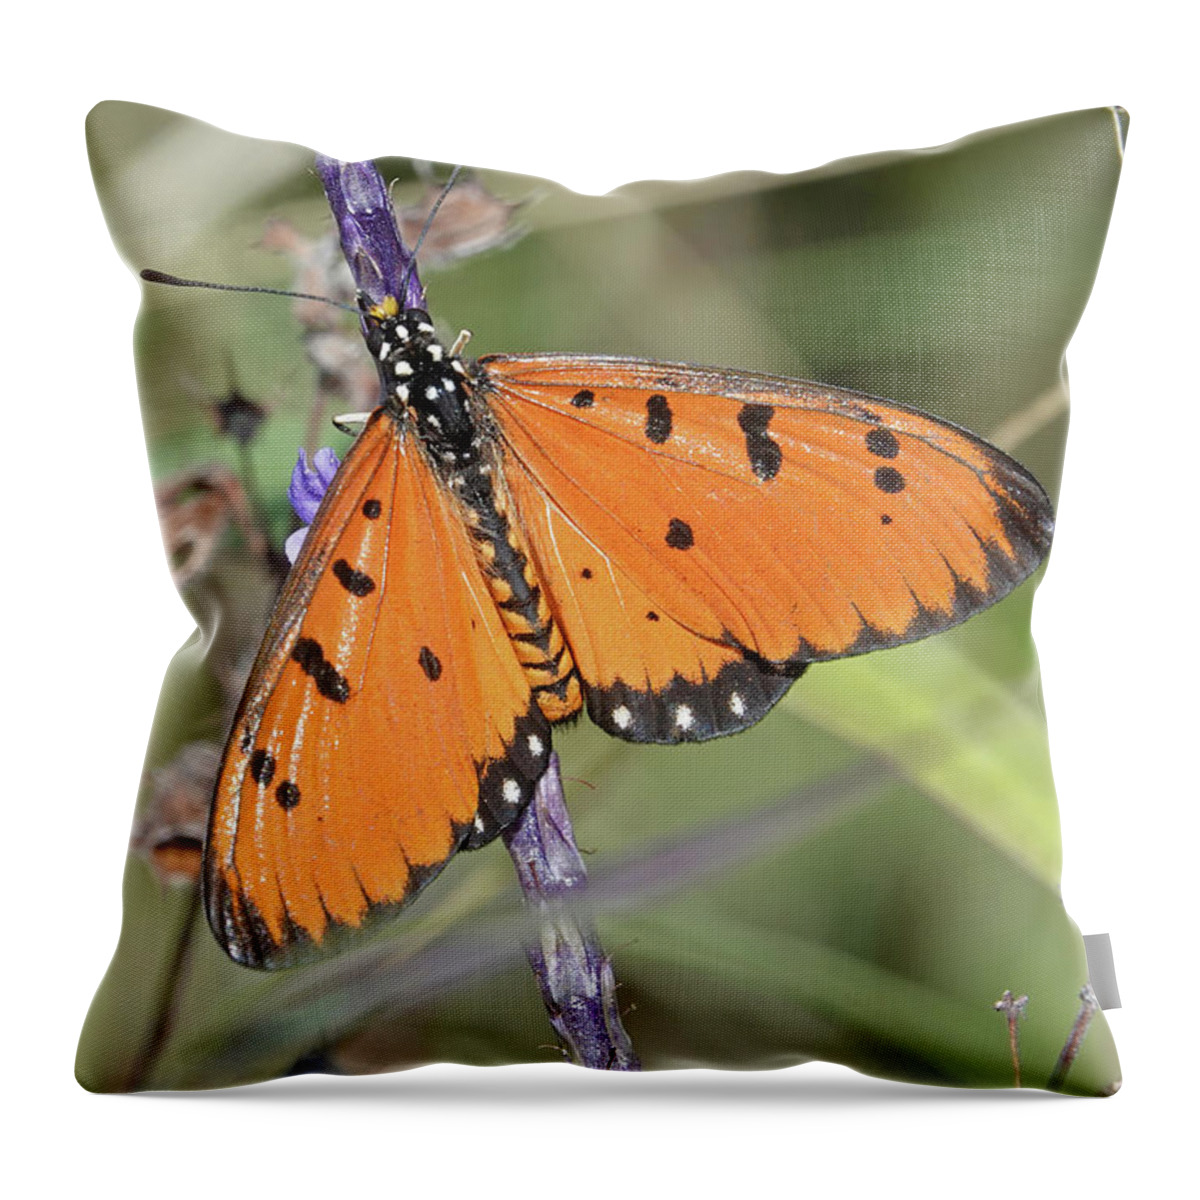 Animals Throw Pillow featuring the photograph Tawny Coster by Maryse Jansen